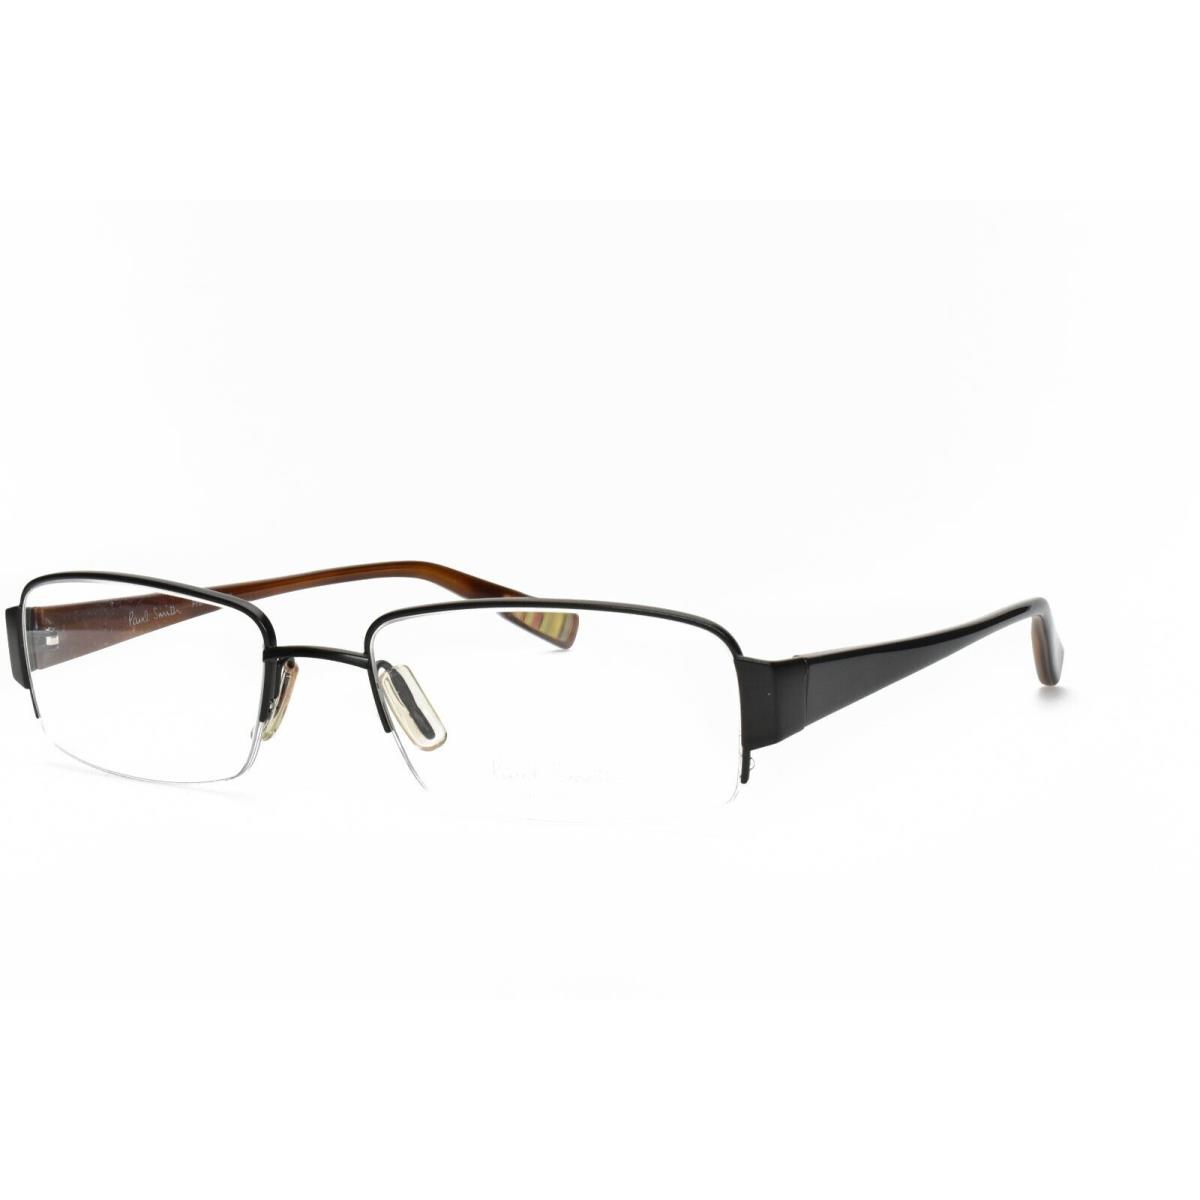 Paul Smith PS 1001 OX Eyeglasses Frames Only 54-18-145